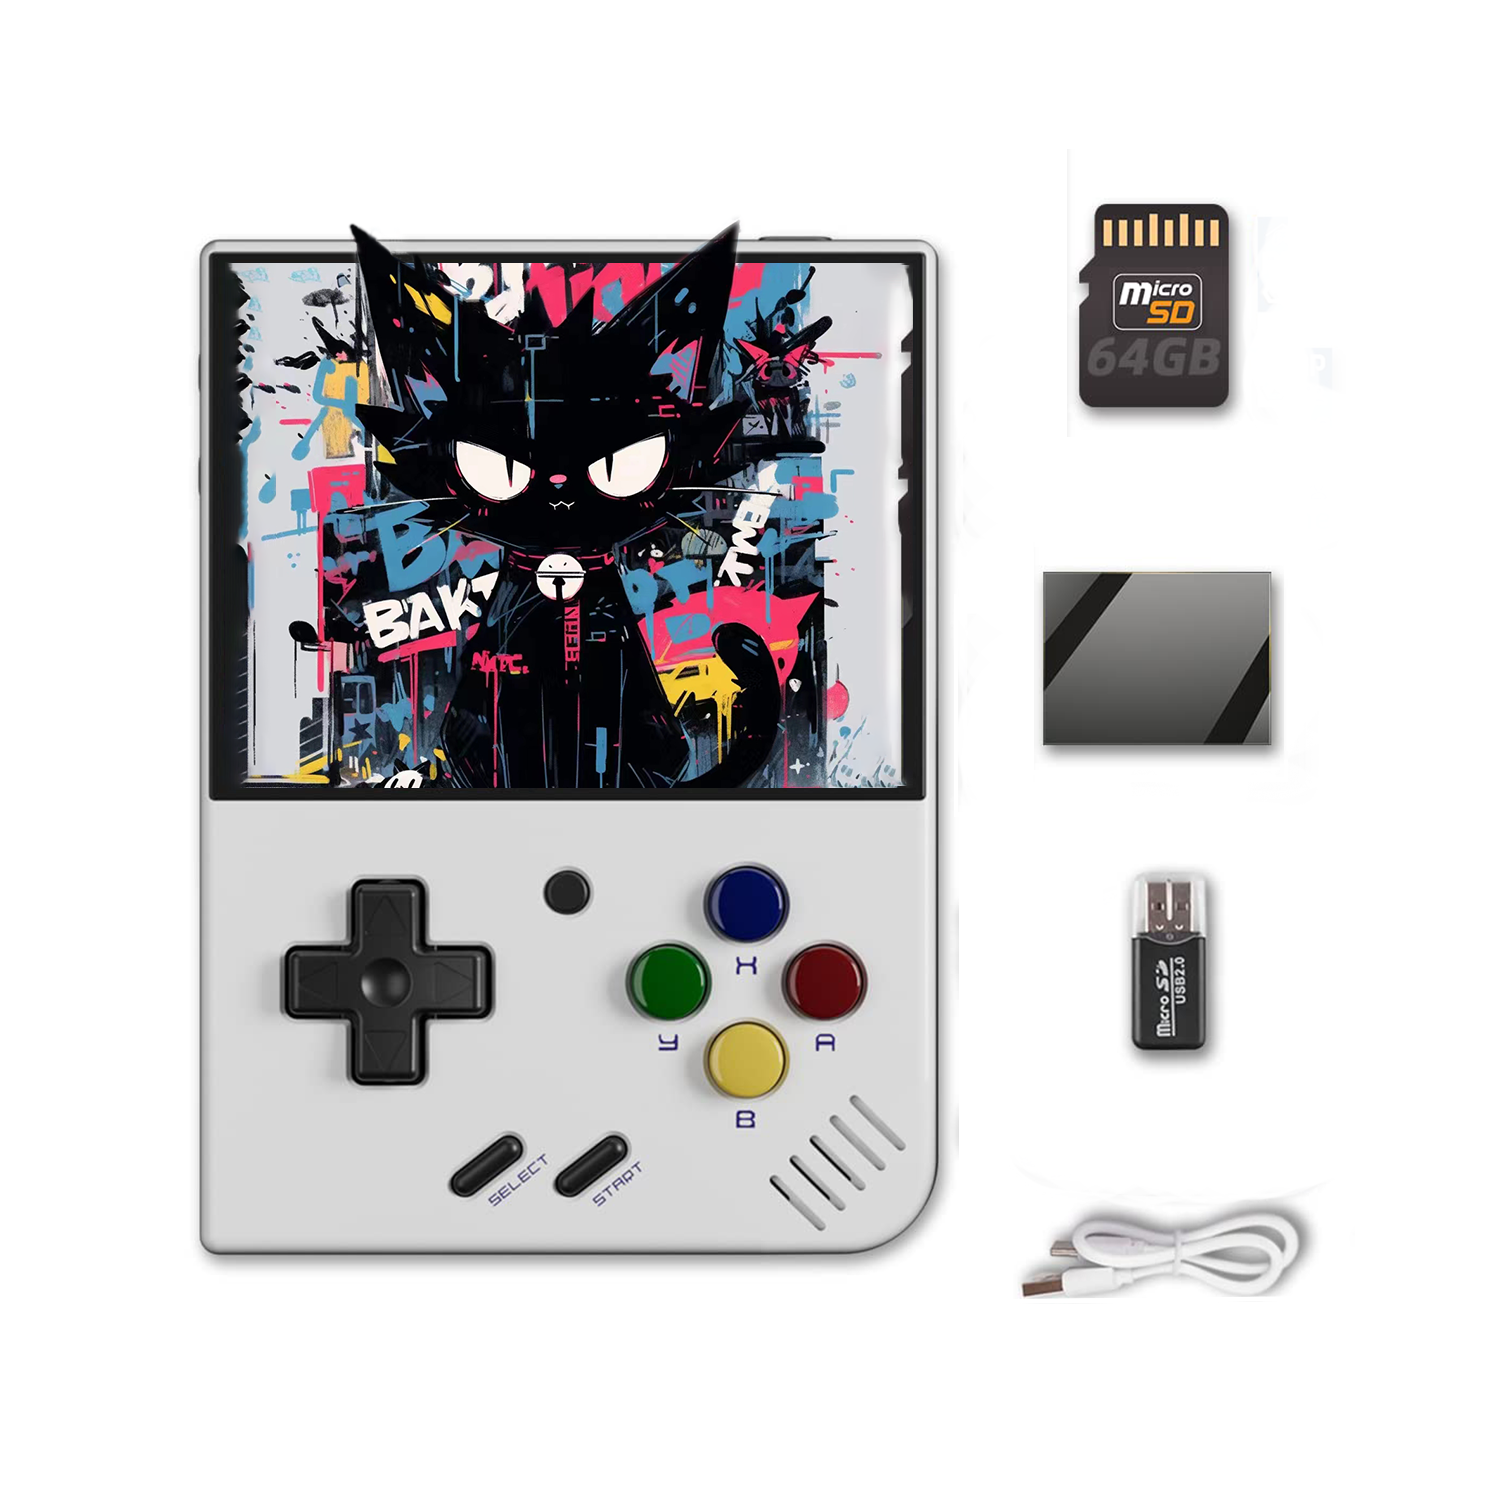  RG405V Video Handheld Game Console 4 inch IPS Touch Screen  Android 12 T618 5500mAh Battery Portable Retro Player 5G WiFi Bluetooth  Automatically Heat Dissipation 128G 3154 Games (RG405V-Grey) : Toys & Games